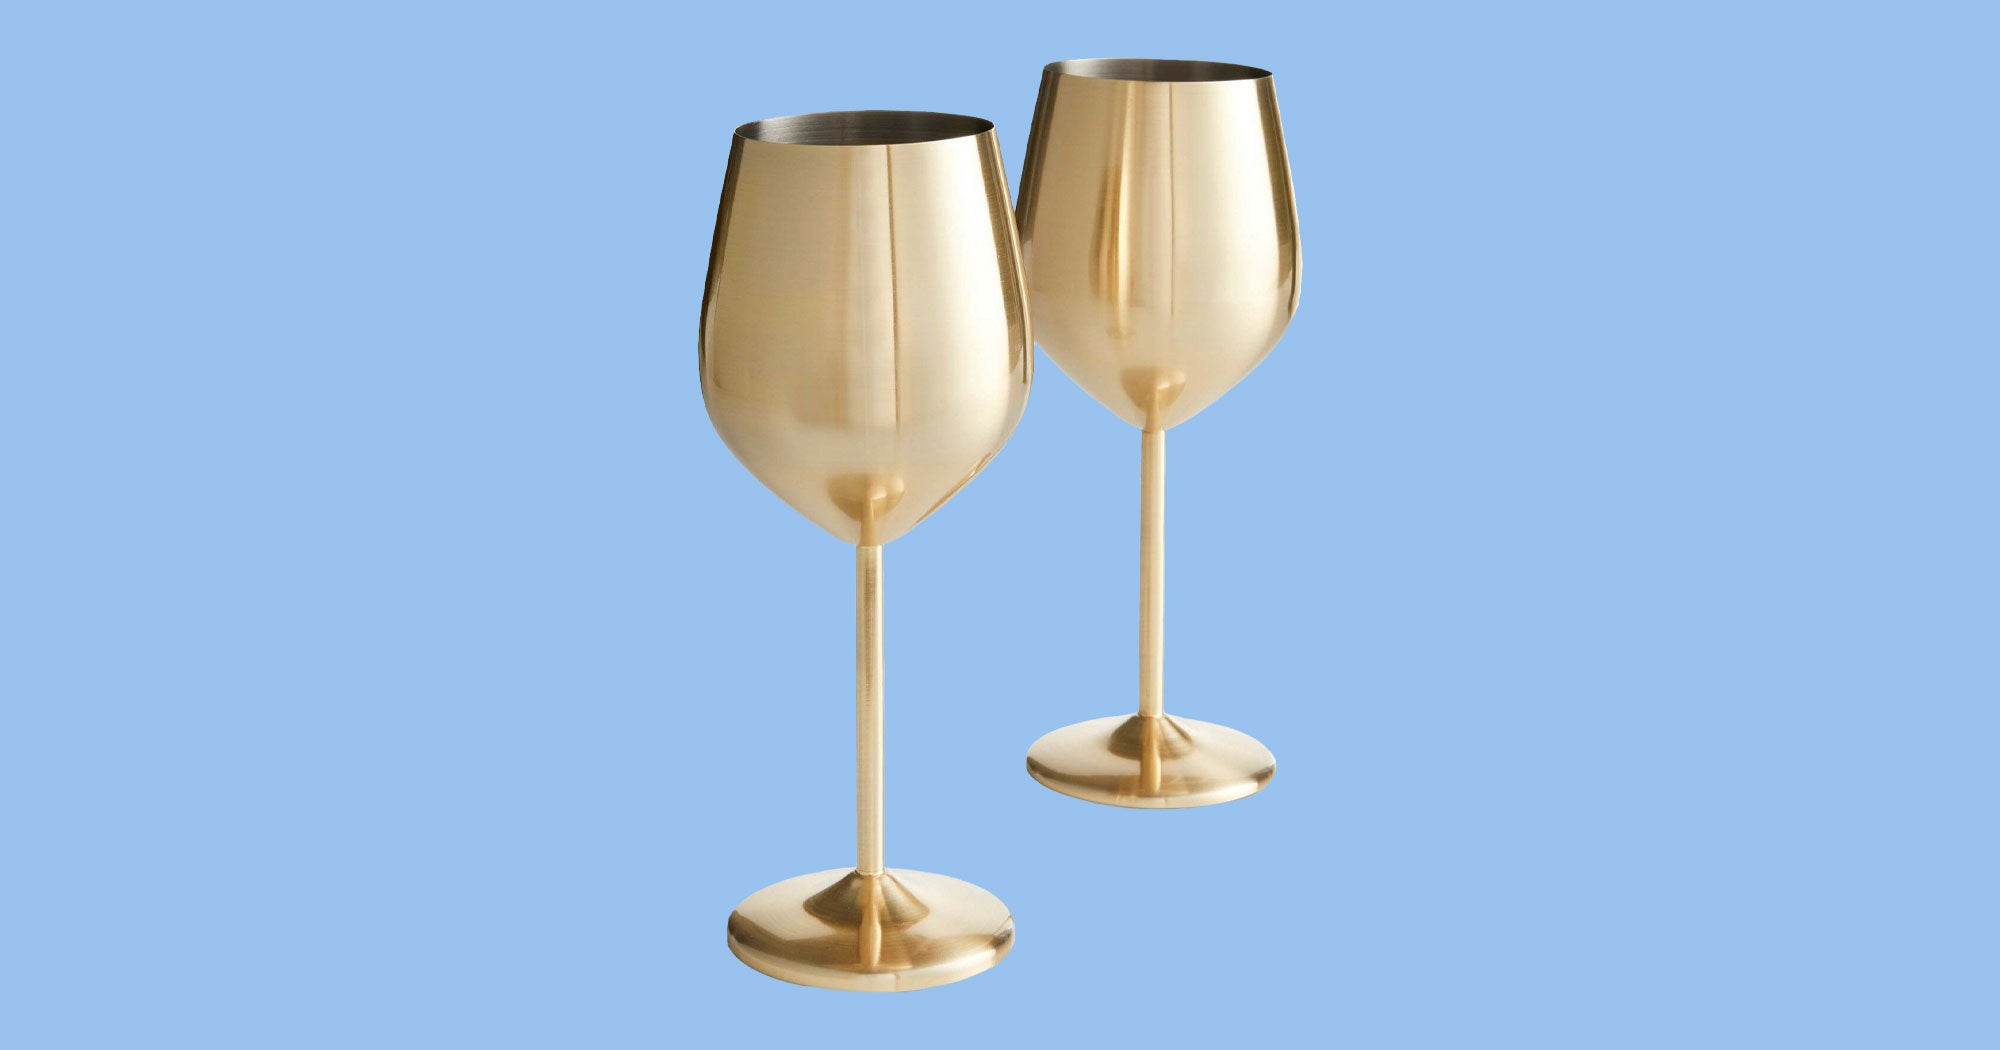 Where To Buy The Love Is Blind Gold Metal Wine Glasses 